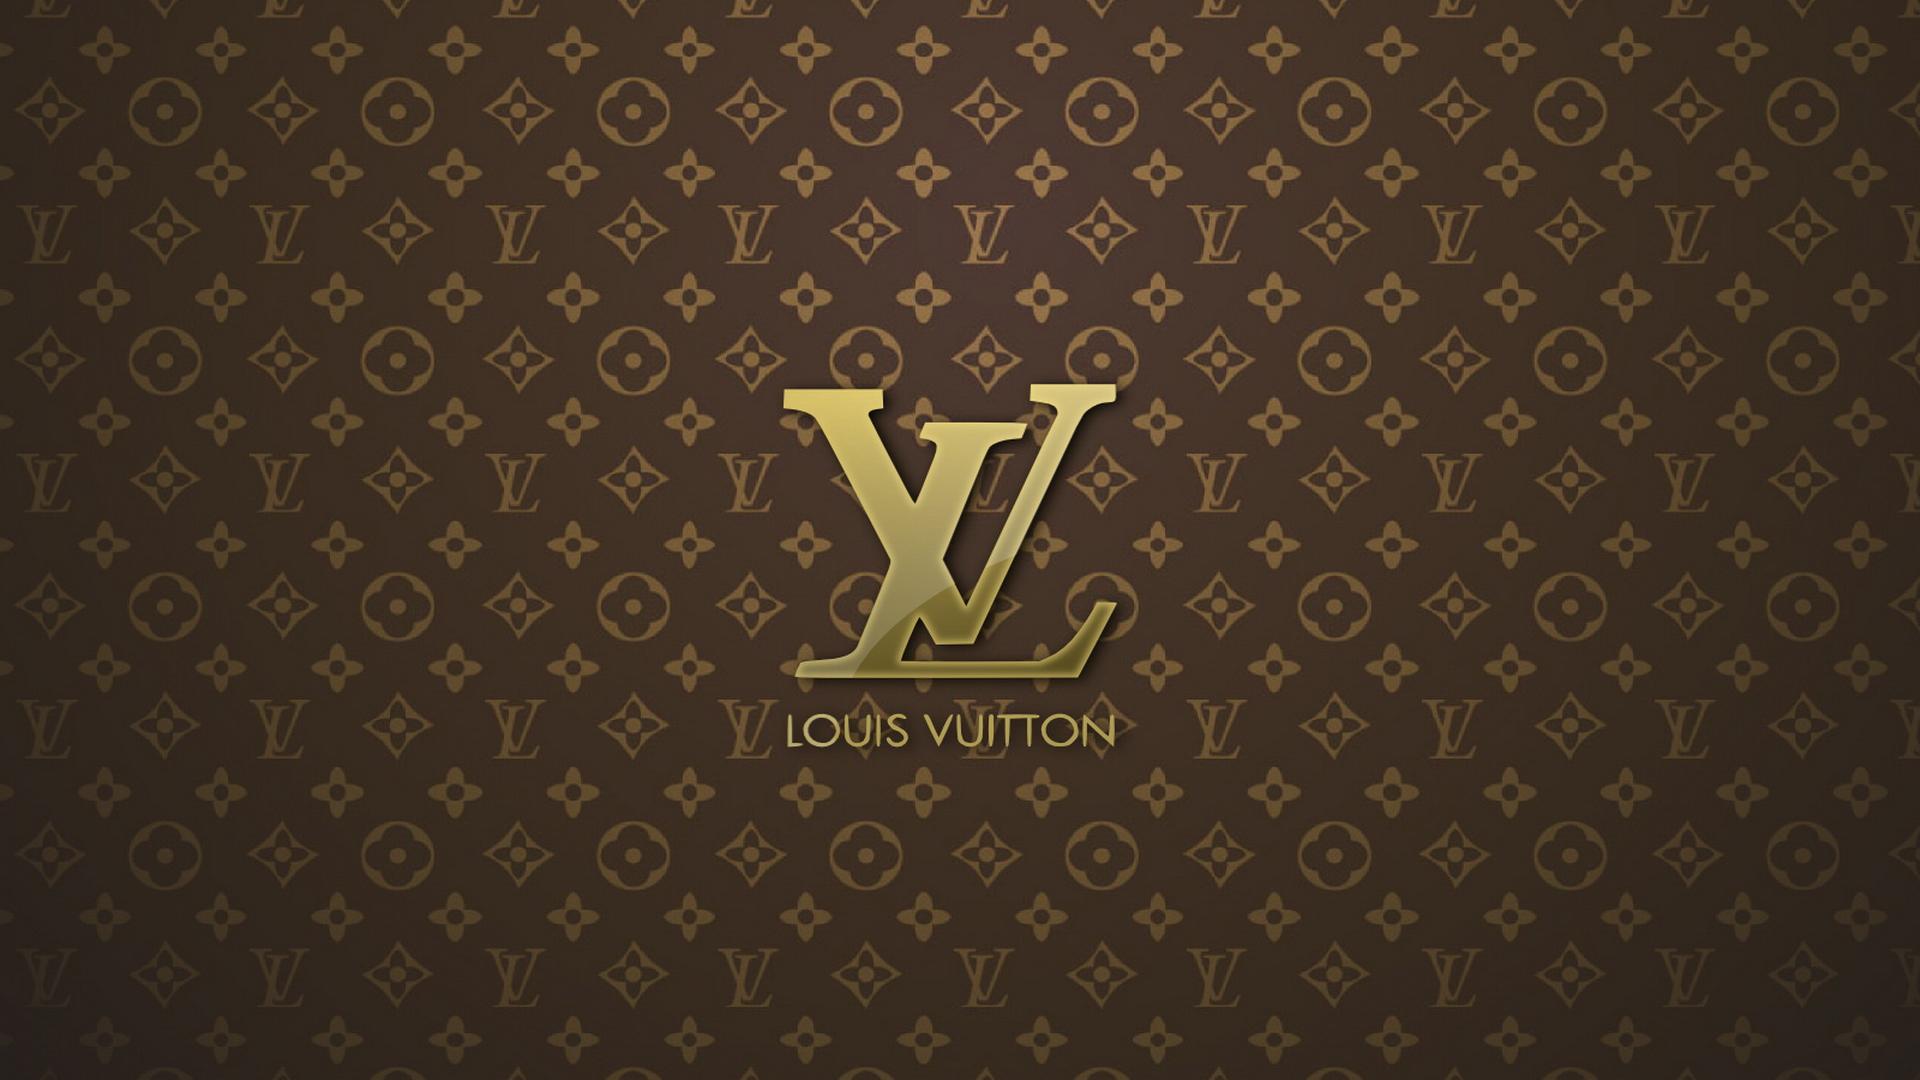 What is Louis Vuitton known for? French Luxury Brand Pronunciation & Info 